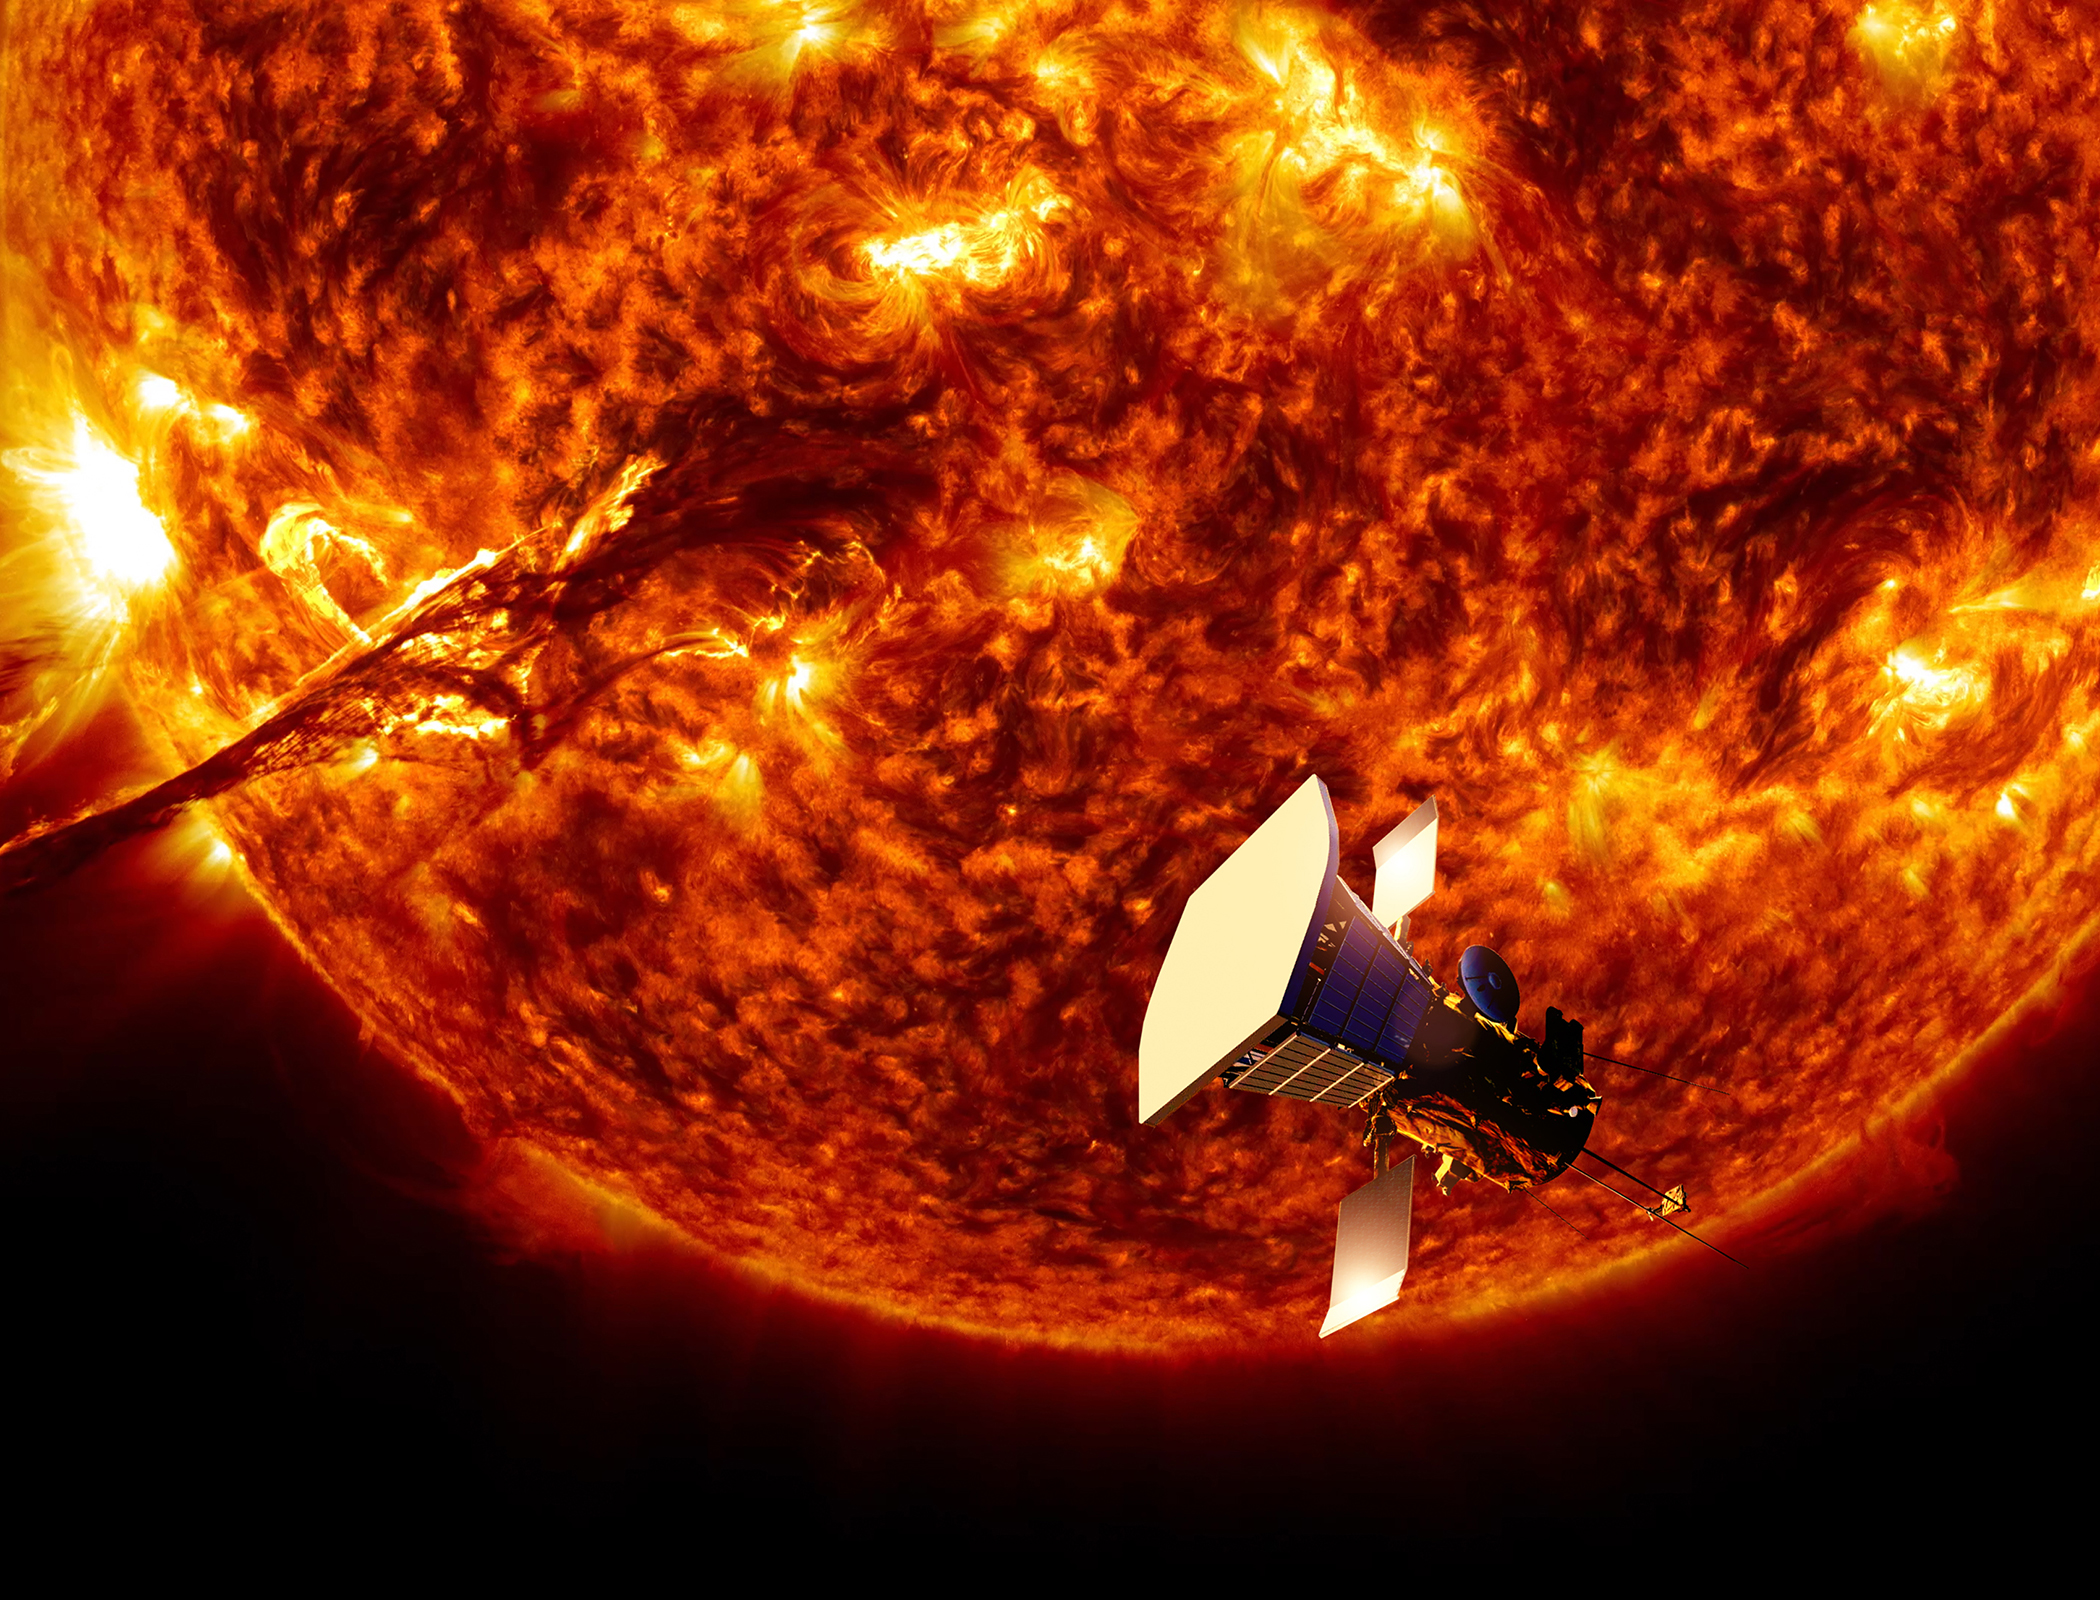 India’s first mission to the Sun could uncover flaring mysteries